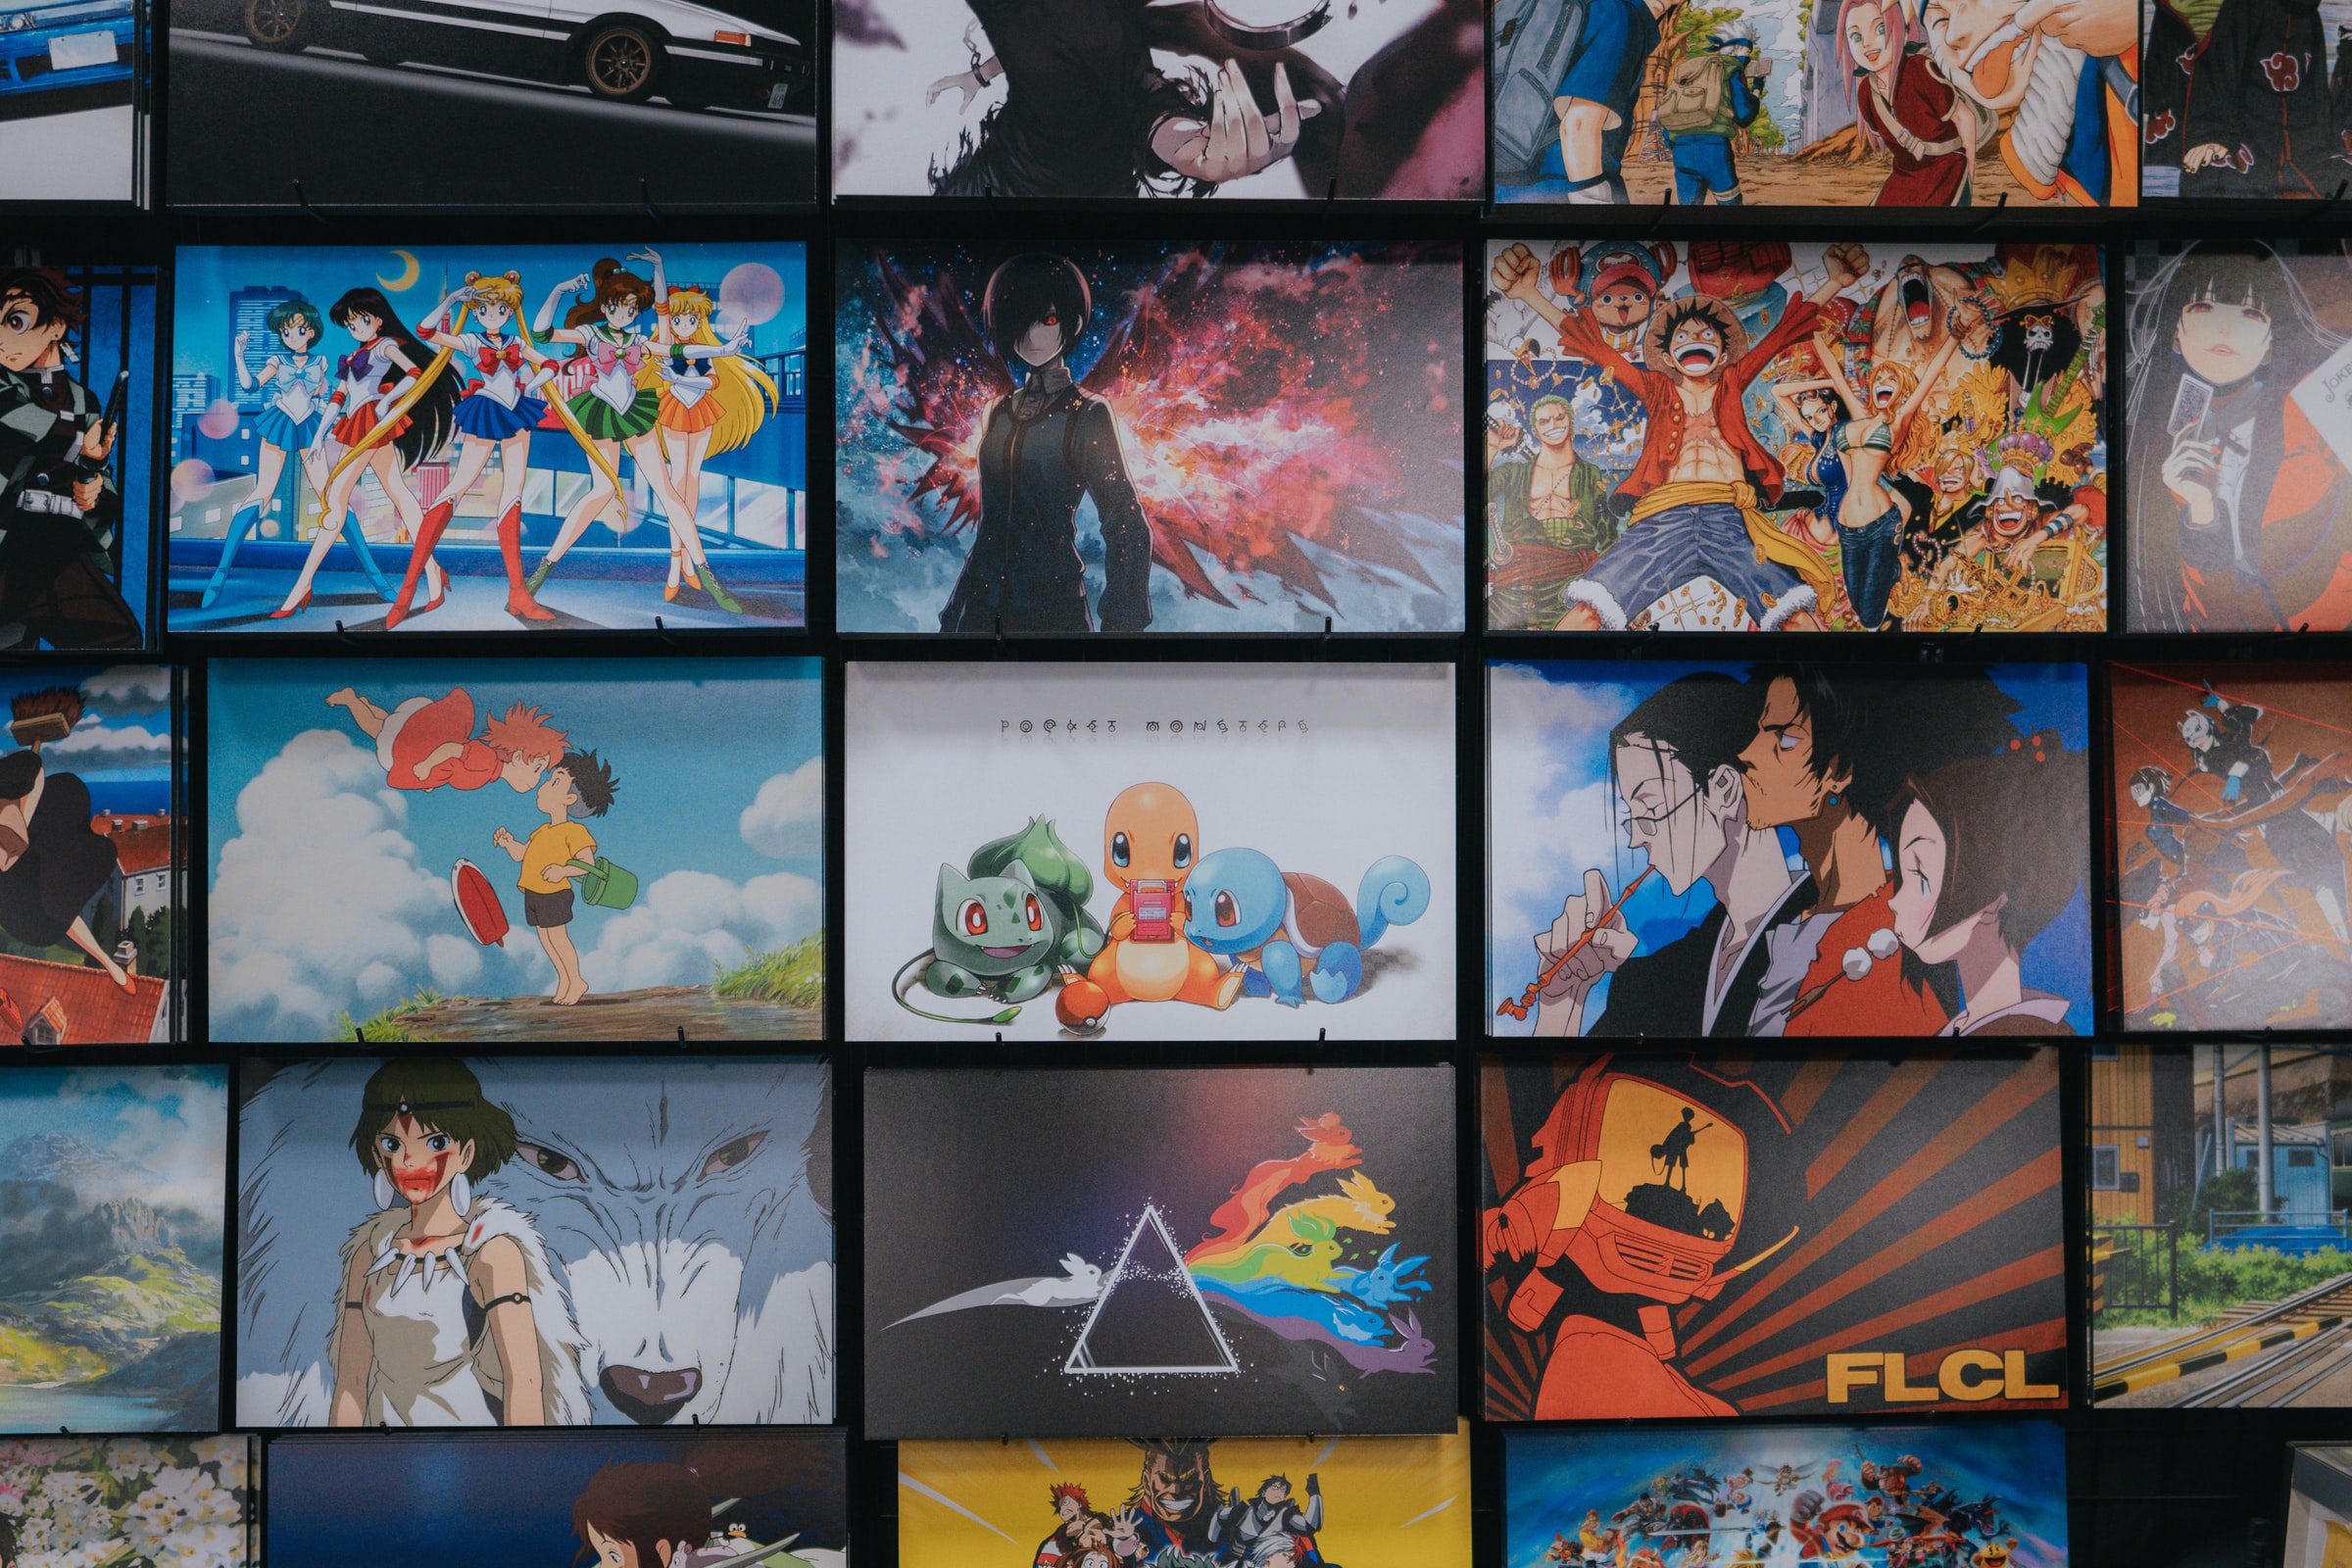 Diffrent anime and anime movie pictures on a wall